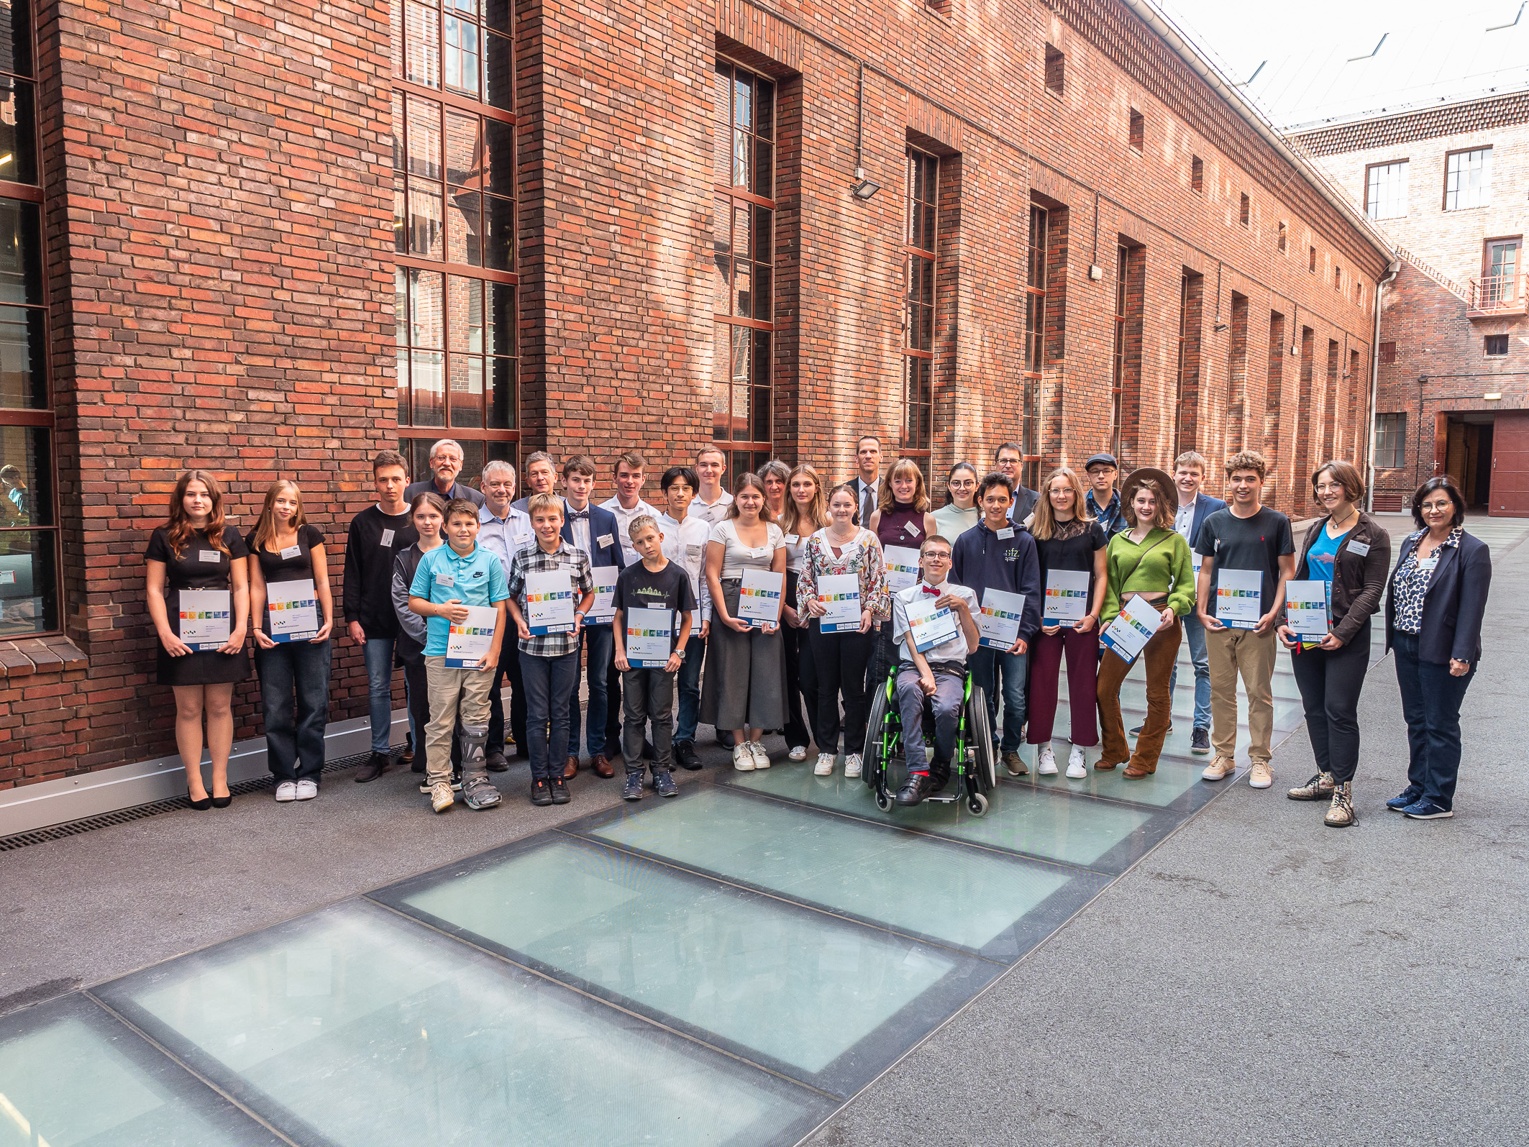 Winners of the best projects after the award ceremony in the 33rd National Environment Competition (BUW)  in Berlin at the betterplace Umspannwerk bUm.